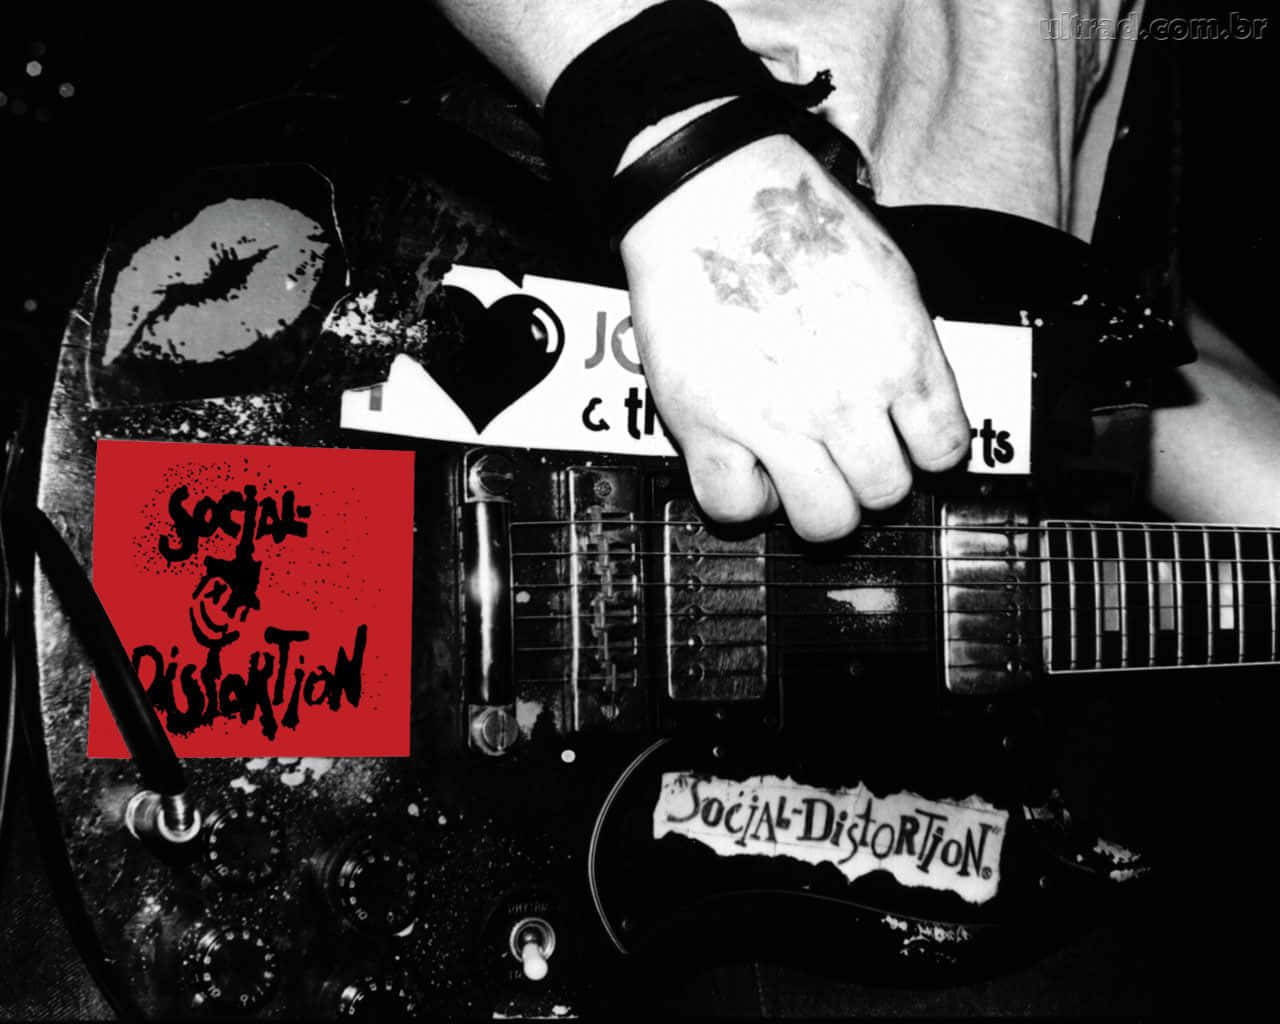 Power Of Punk - A Glimpse Into A Social Distortion Concert Wallpaper